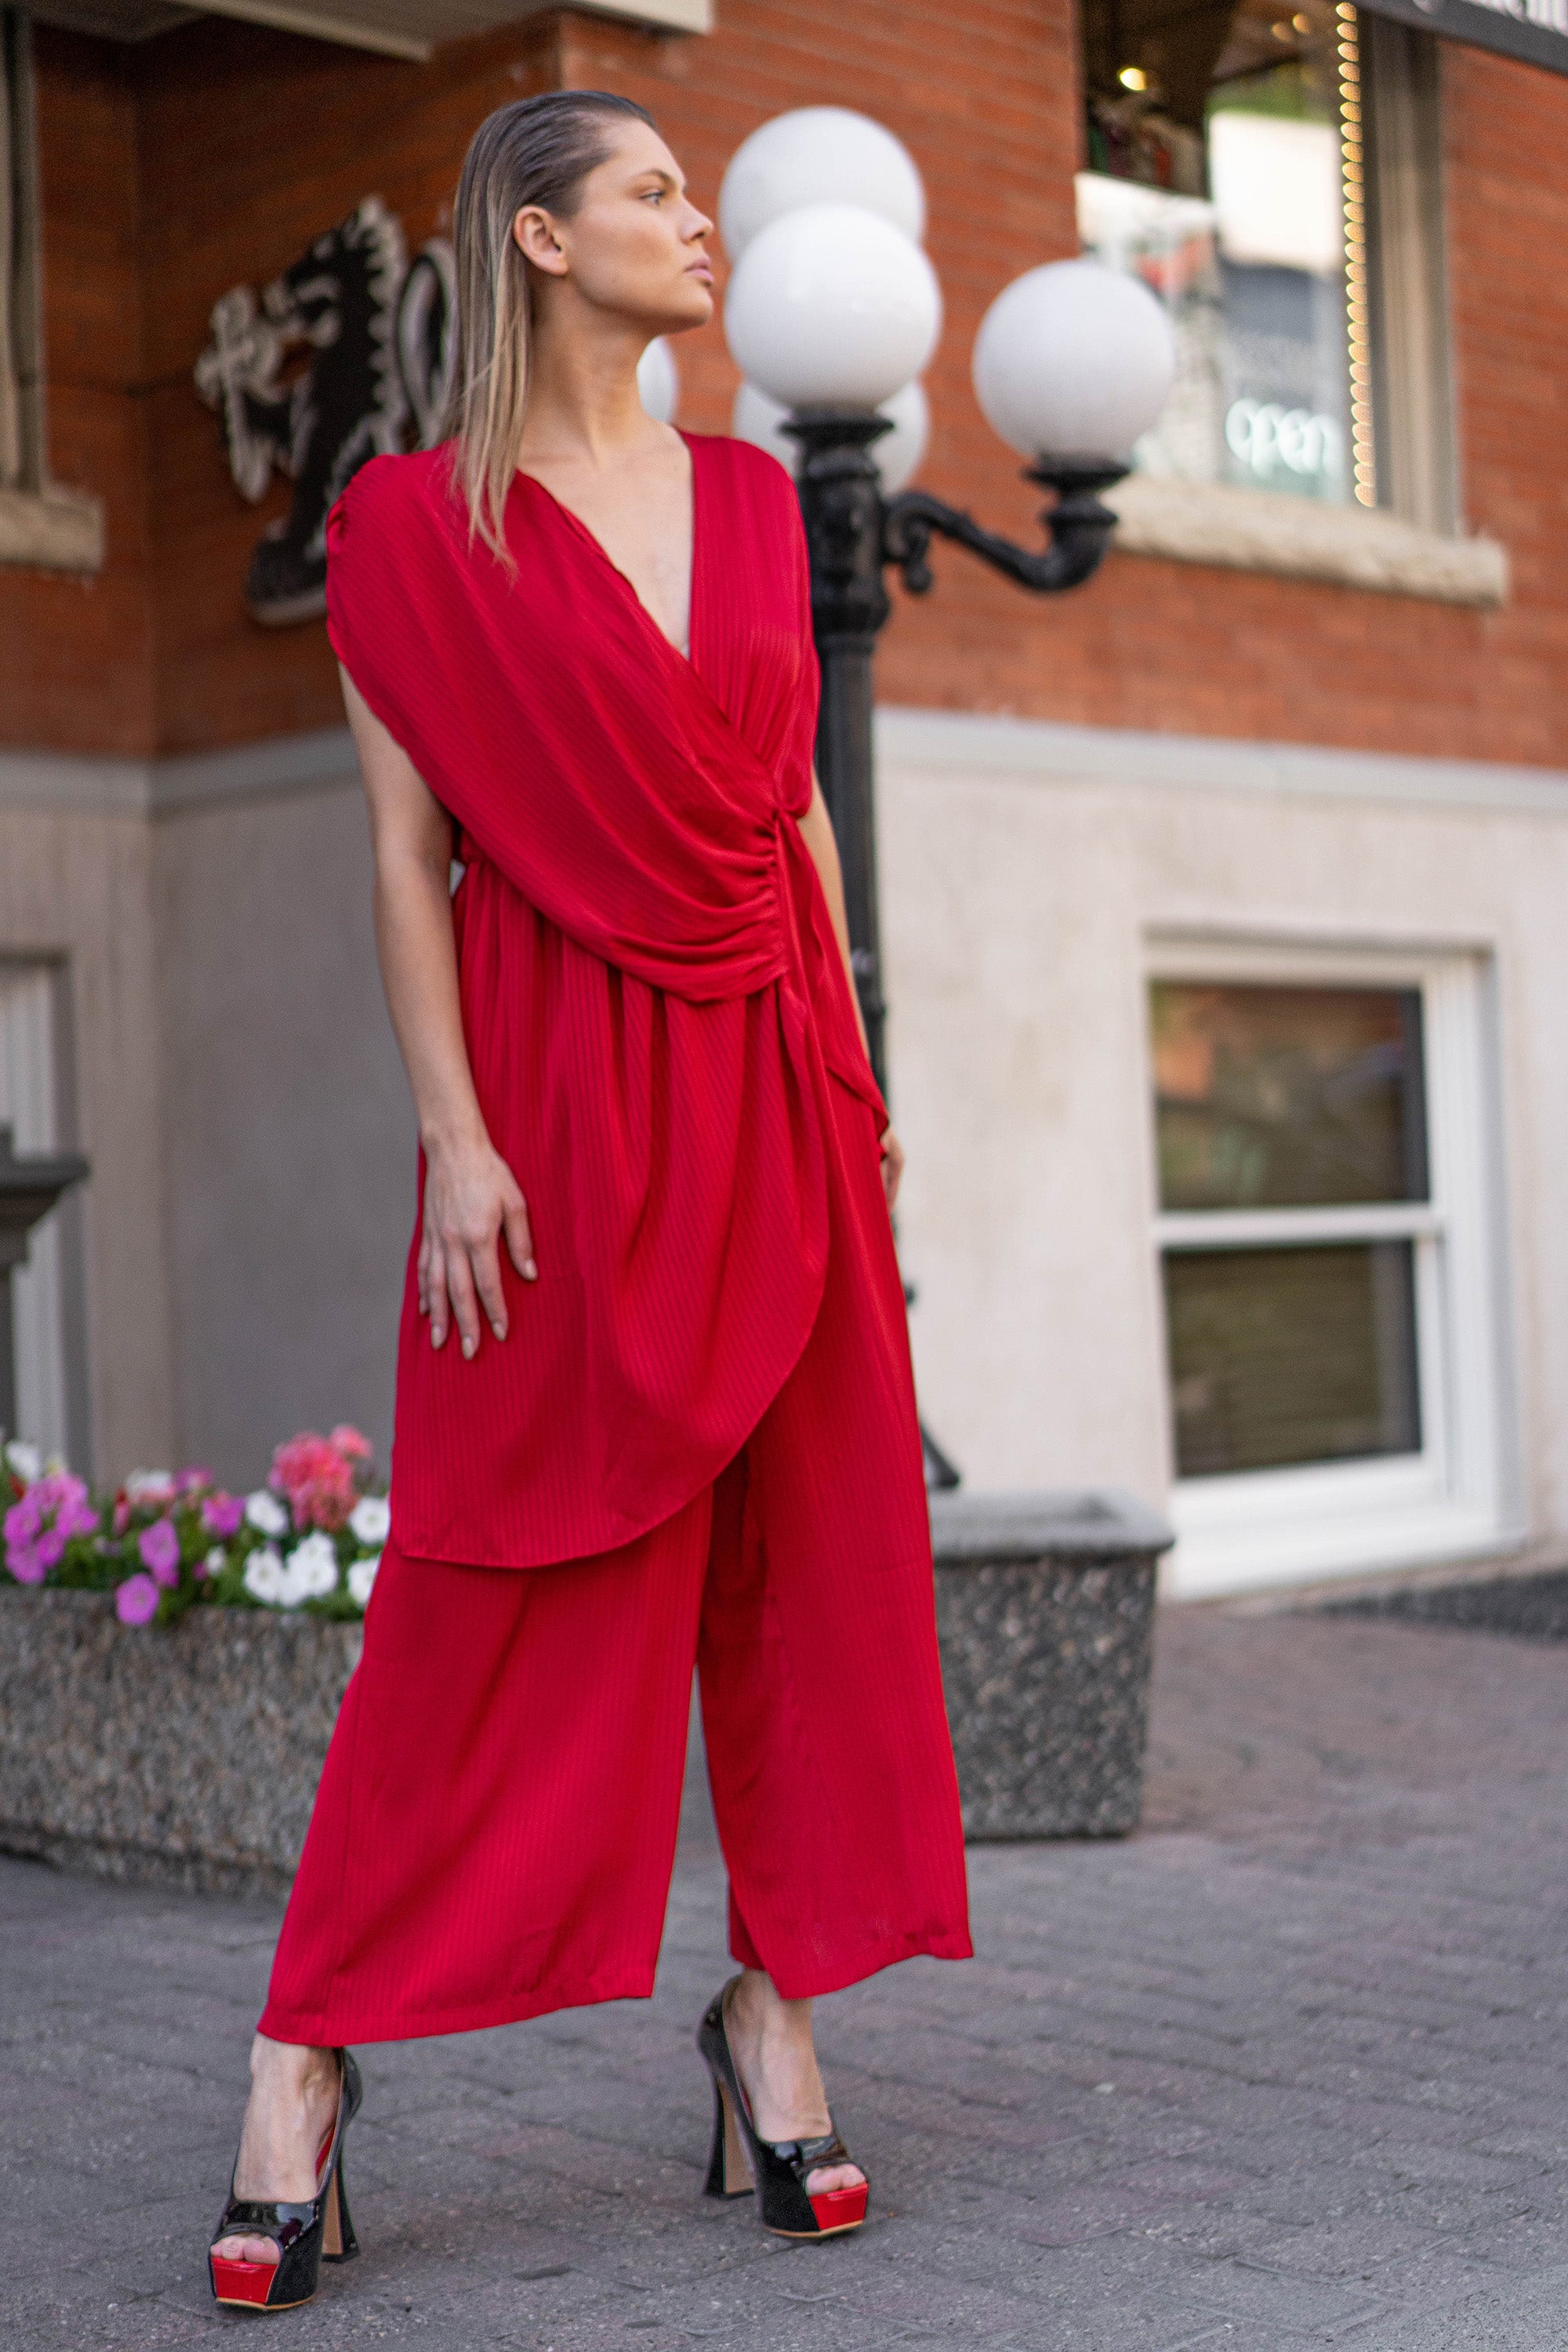 Work outfit inspo  Red jumpsuits outfit, Stylish work outfits